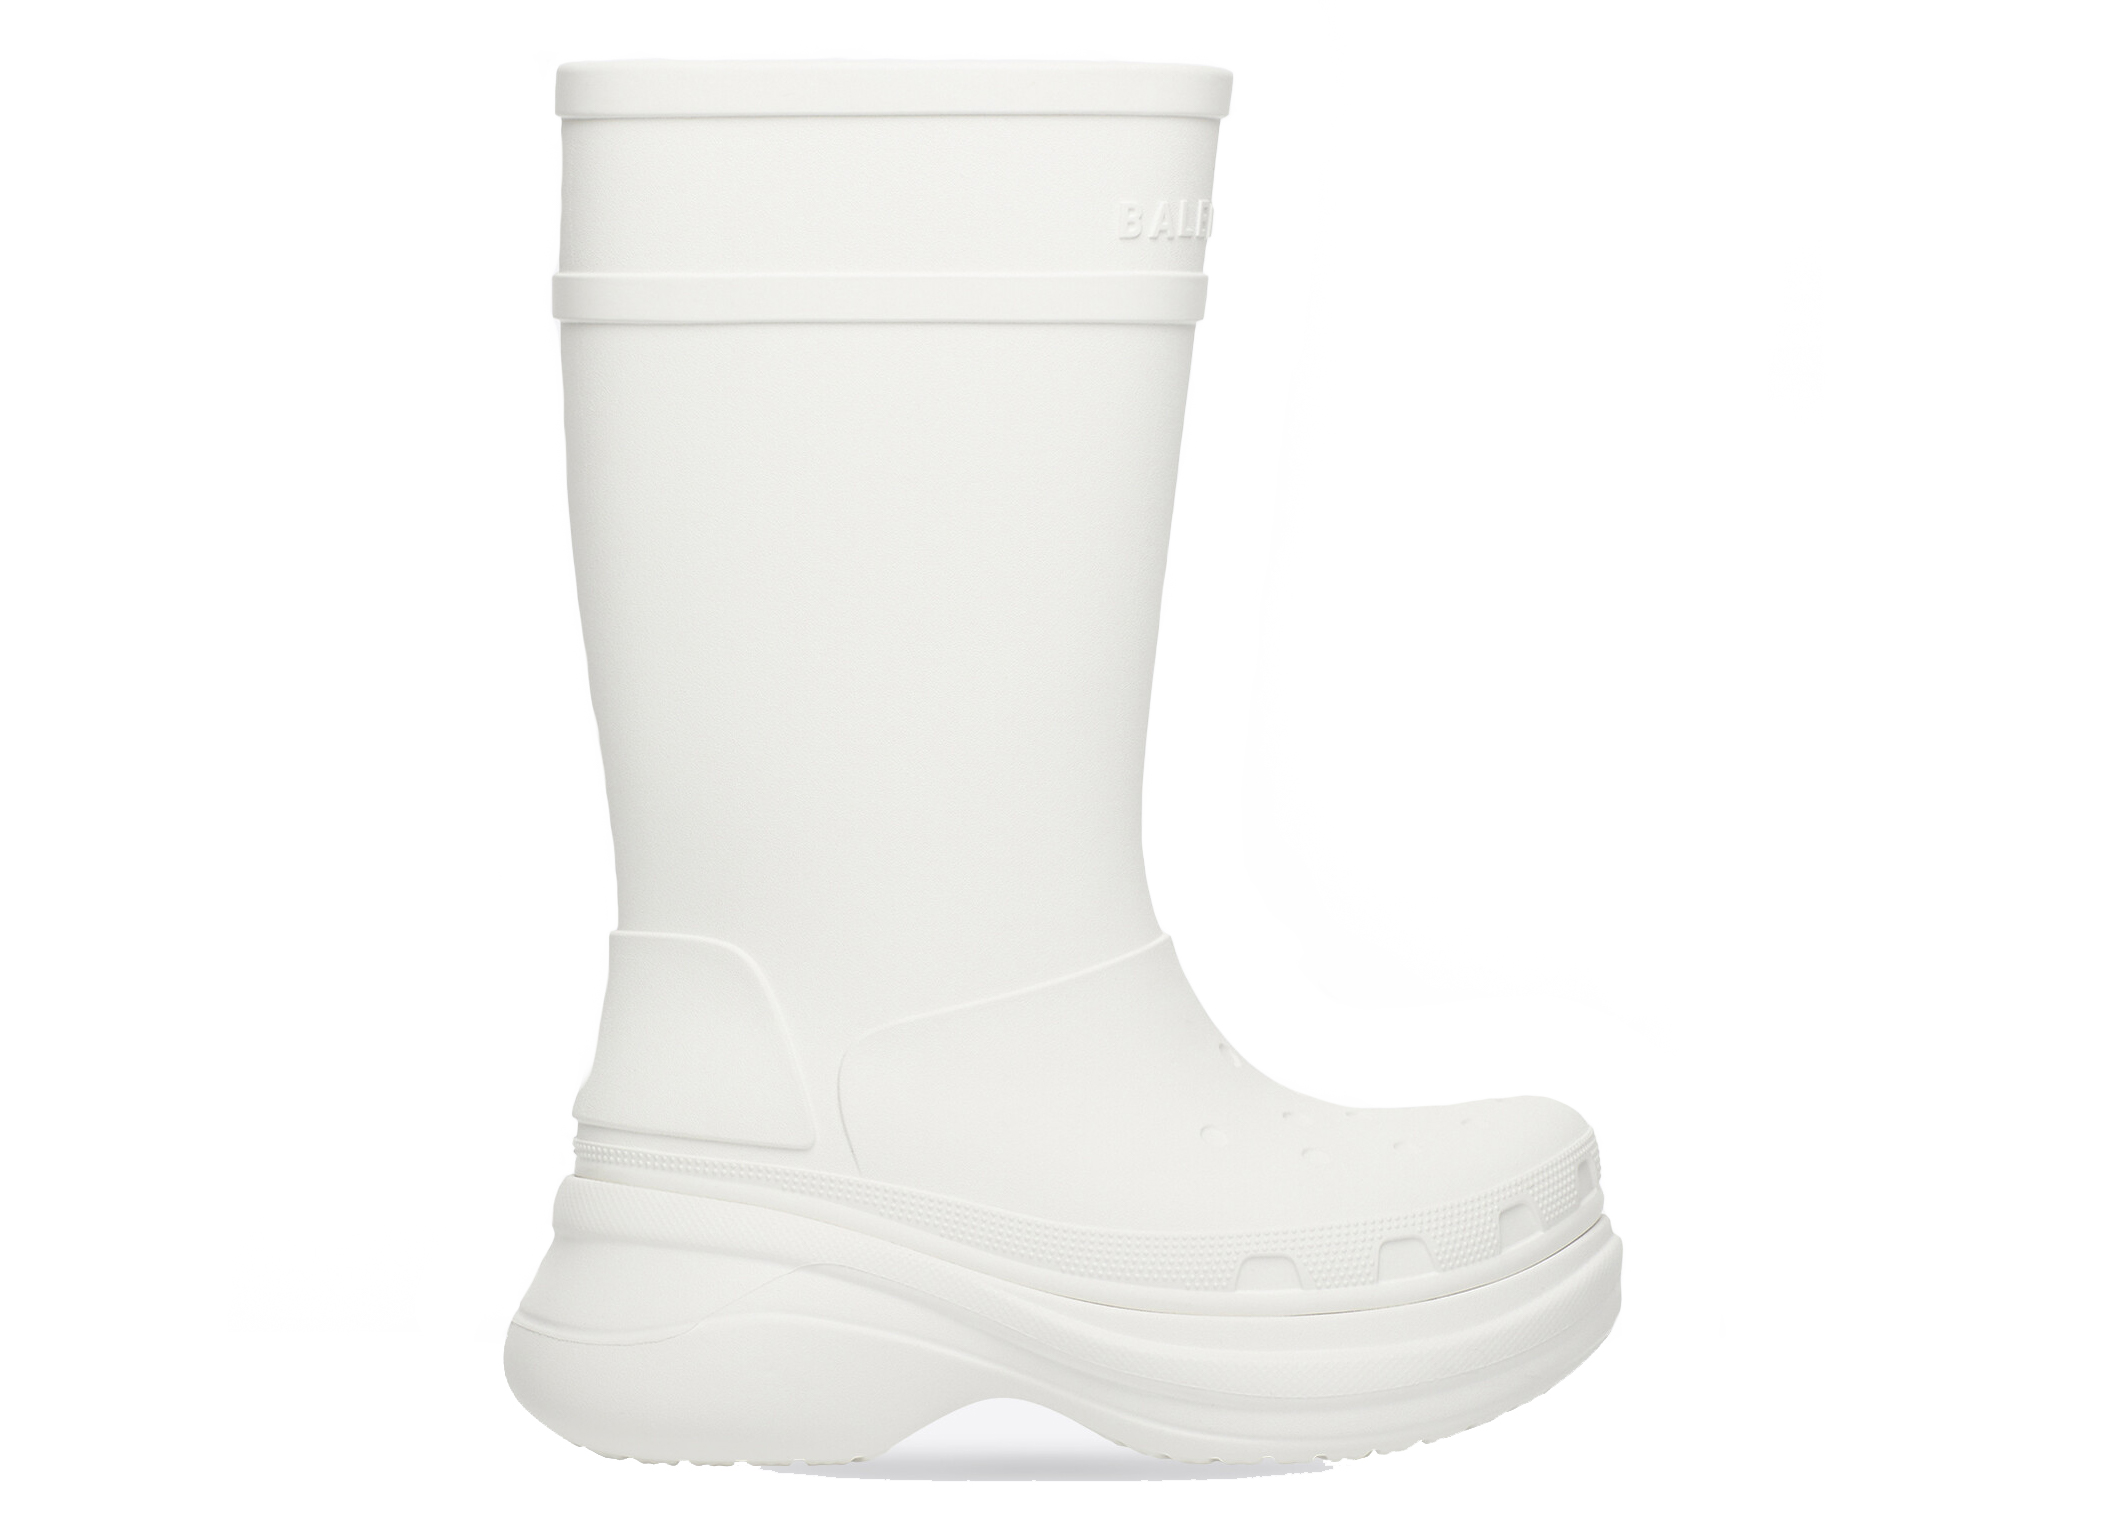 IN THE GORPCORE OF WINTER HERE ARE THE TOP WELLIES TO KEEP YOU DRY   Culted